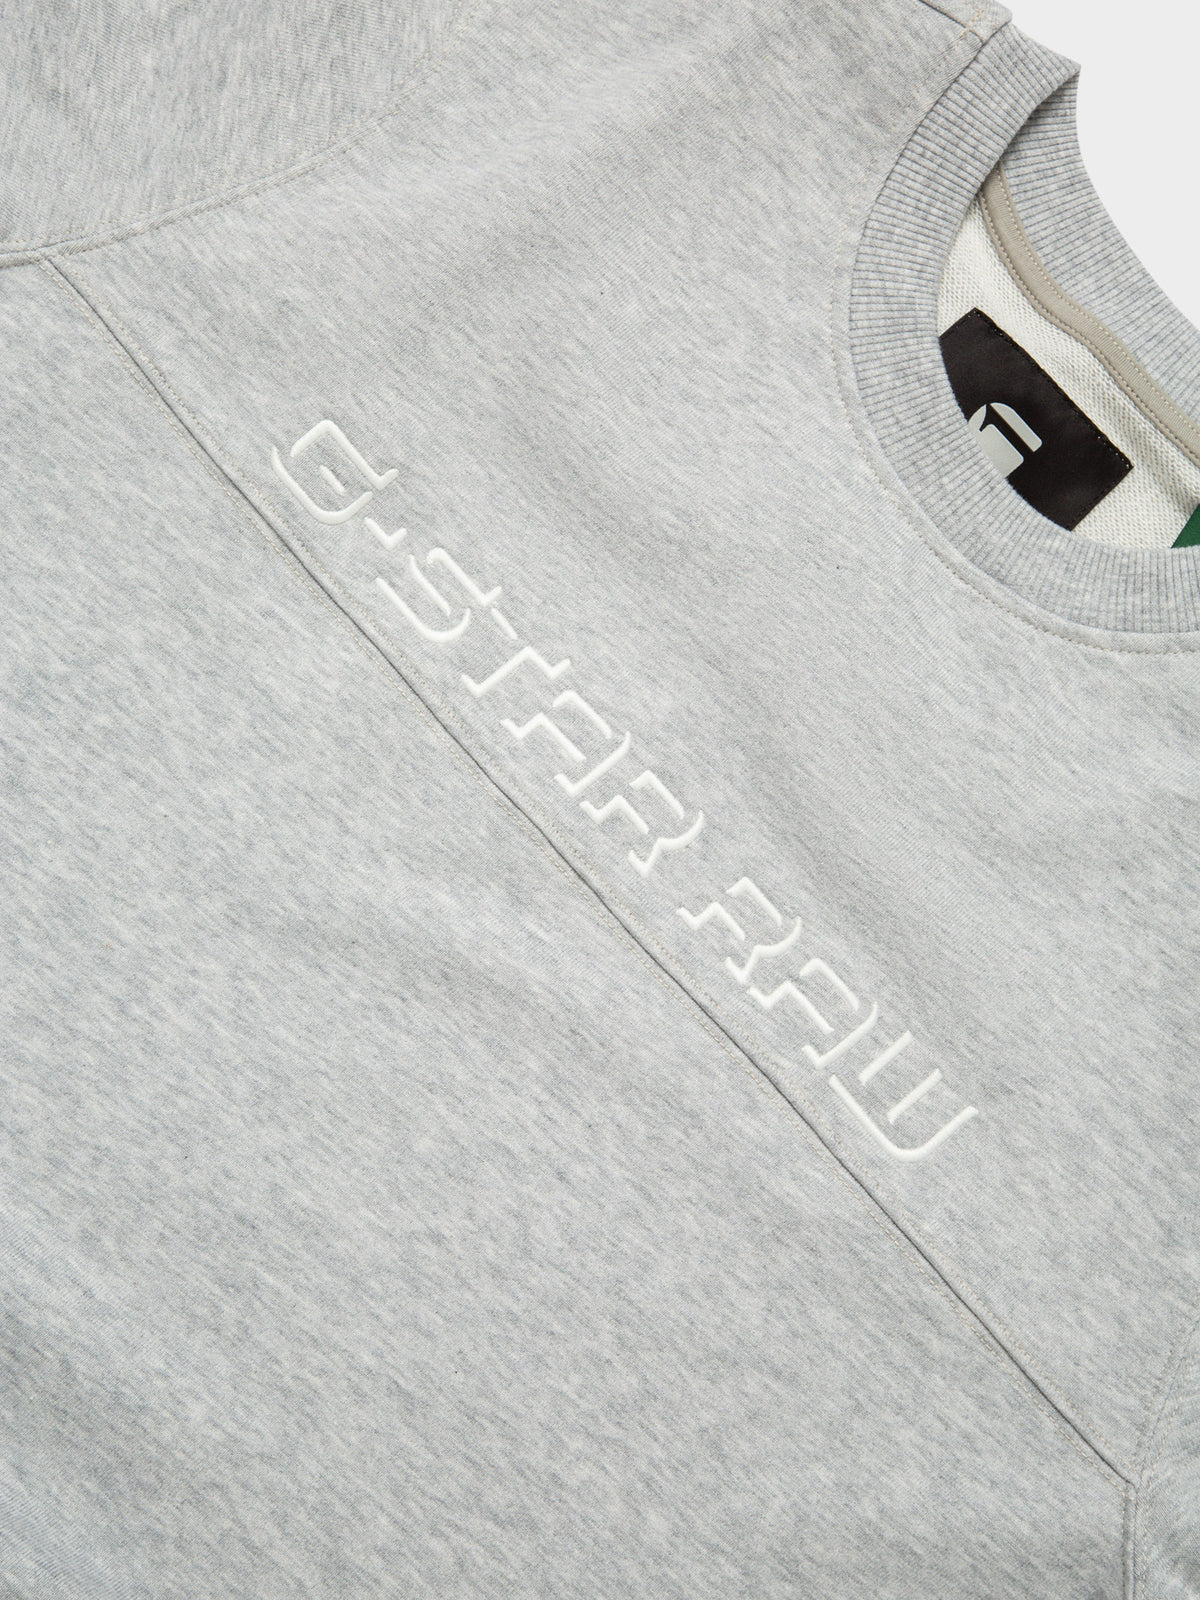 Embro Paneled GR Sweater in Light Grey Heather